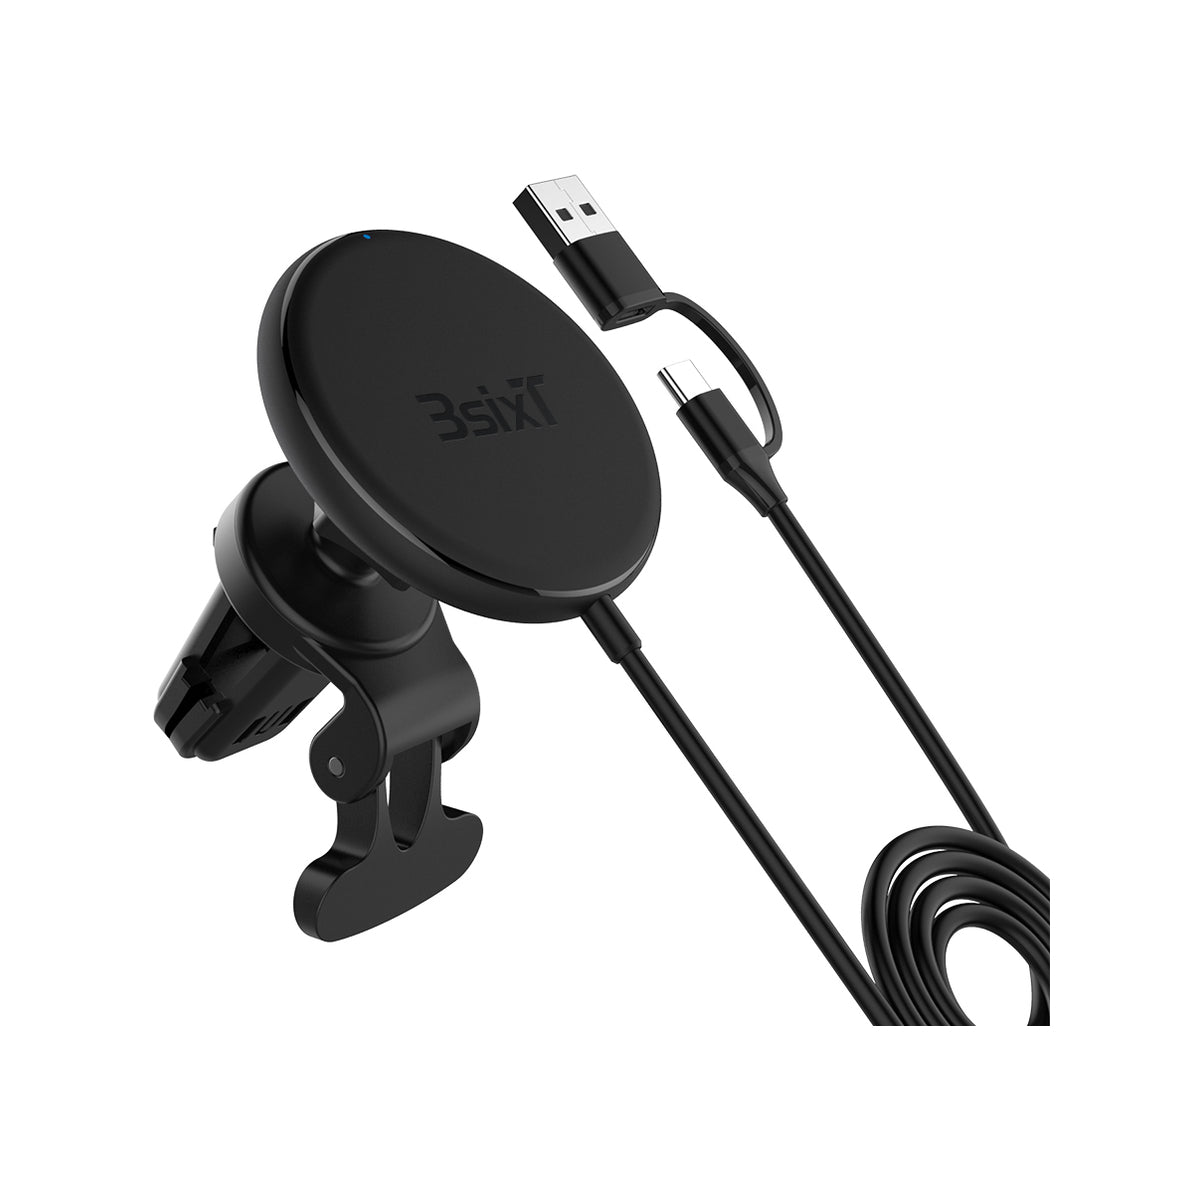 3sixT Magnetic Wireless Car Vent Mount 15W w Charger.